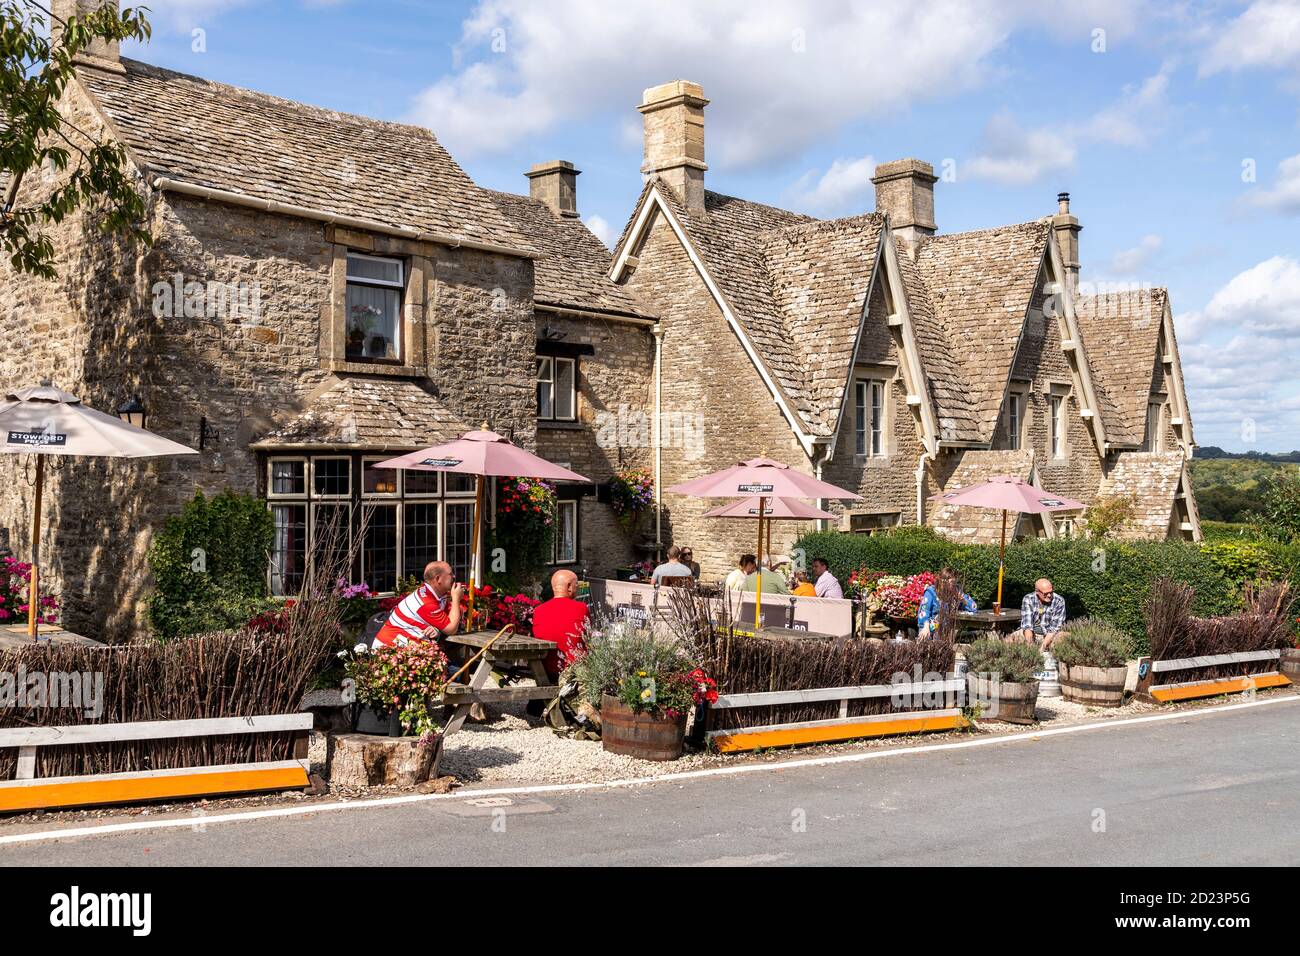 The Carpenters Arms public house on a sunny day in the Cotswold village of Miserden, Gloucestershire UK Stock Photo